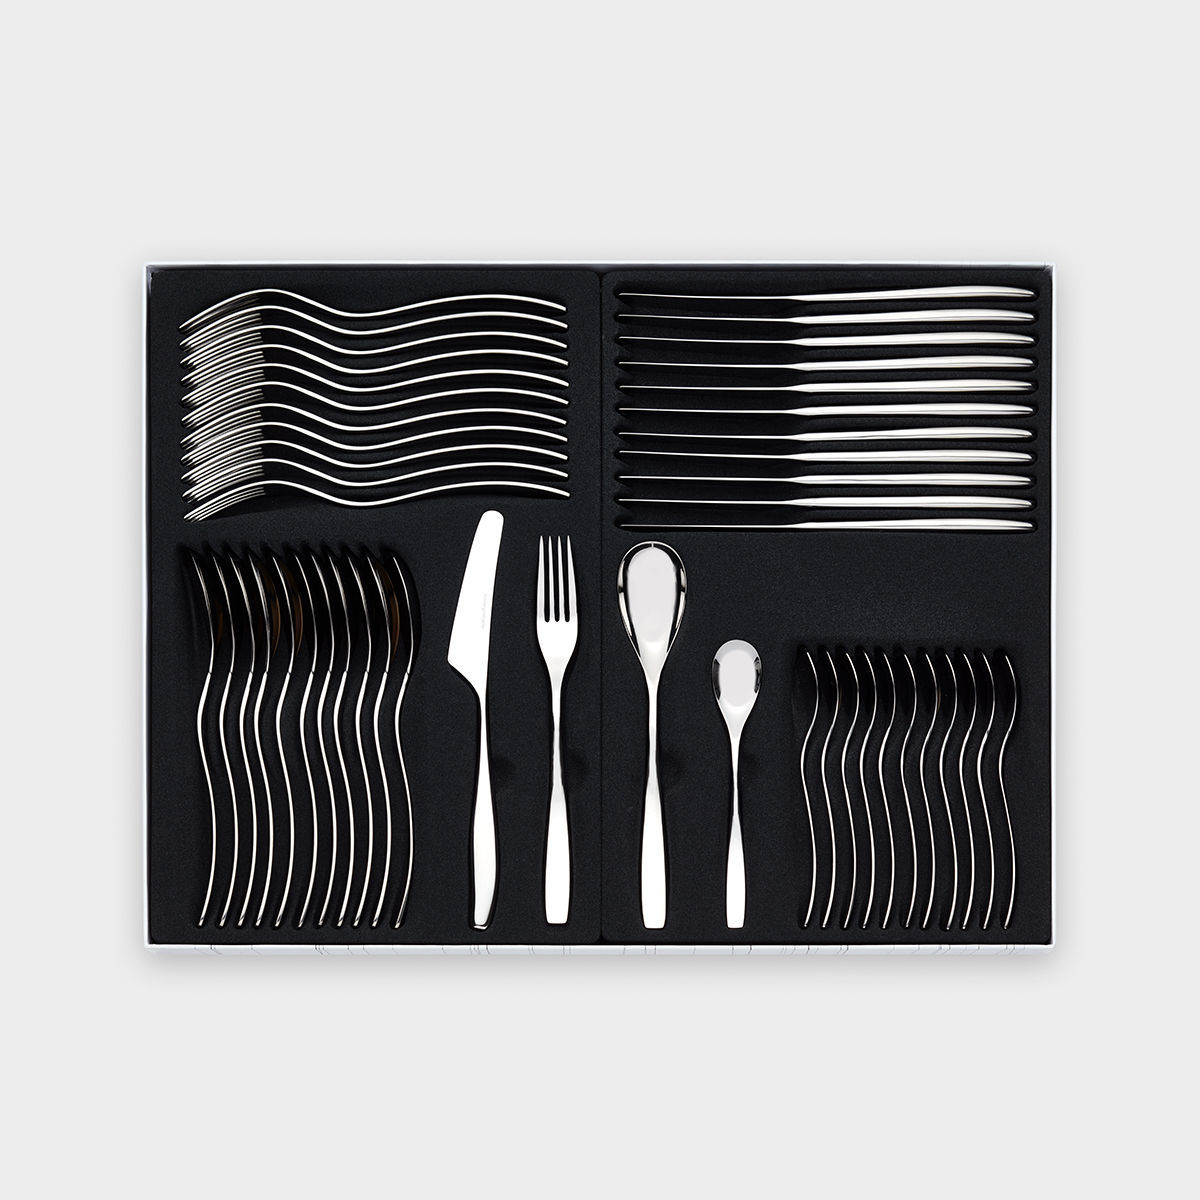 Julie cutlery set 48 pieces product image